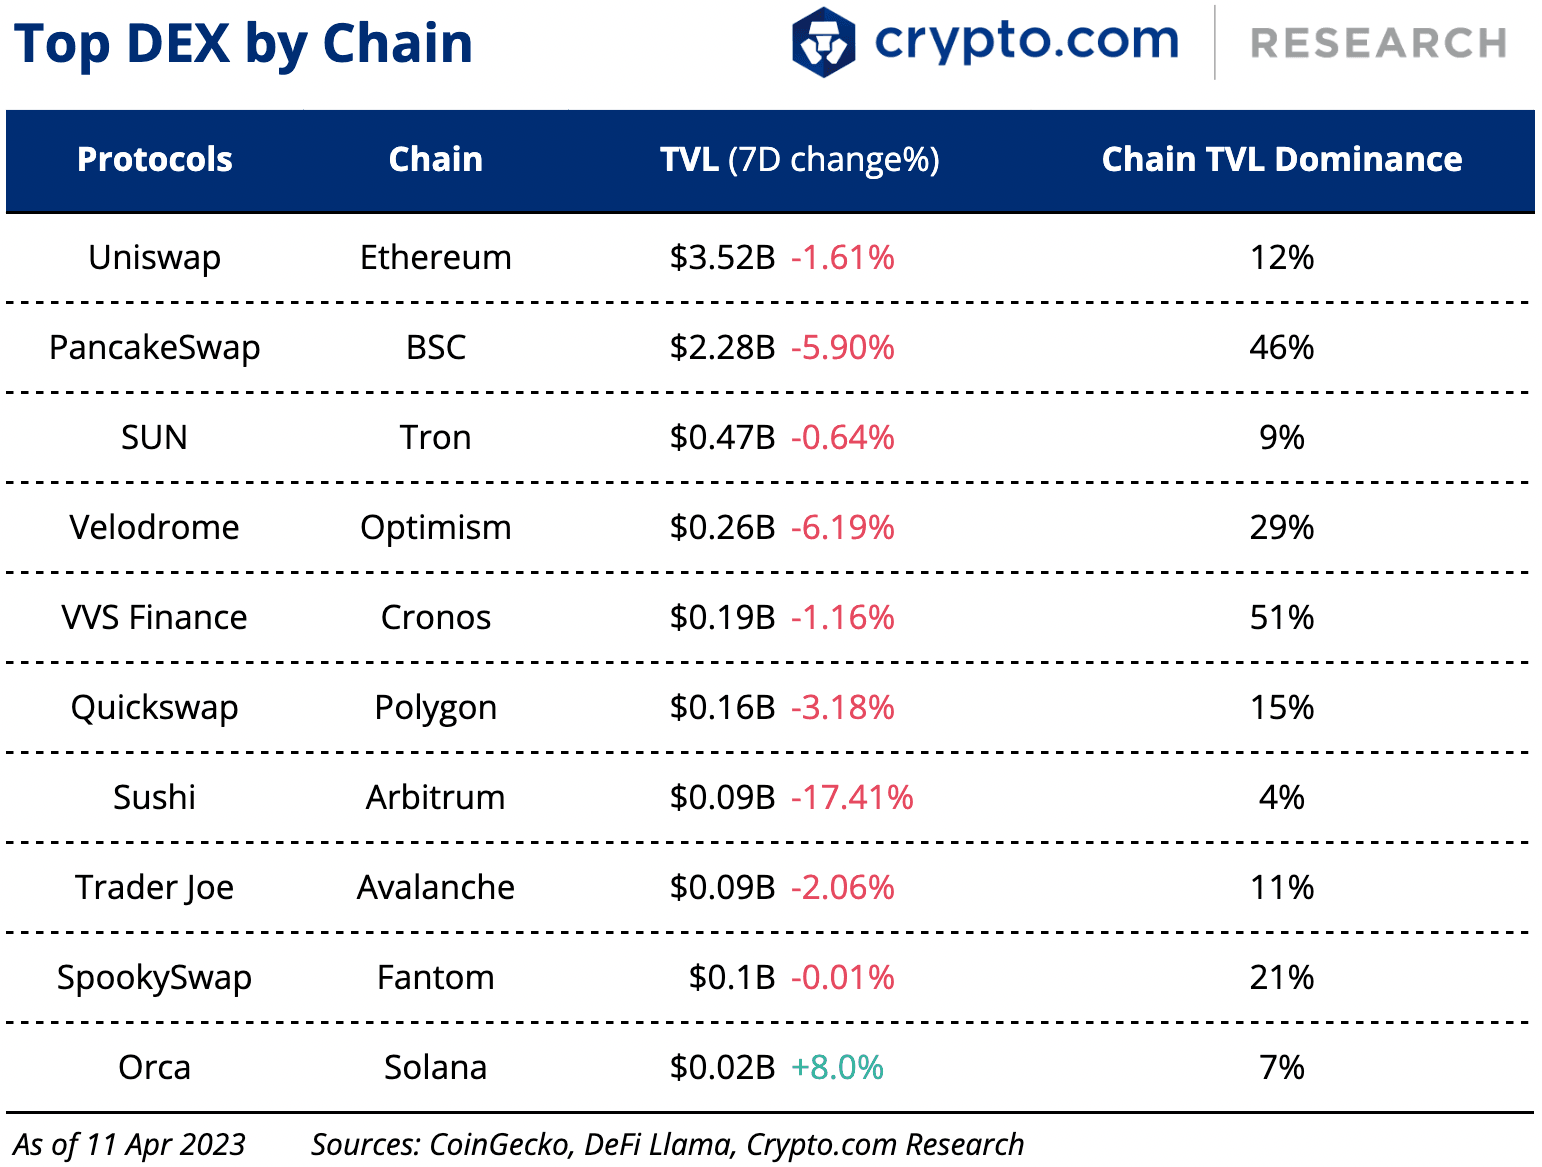 Top Dex By Chain 12 Apr